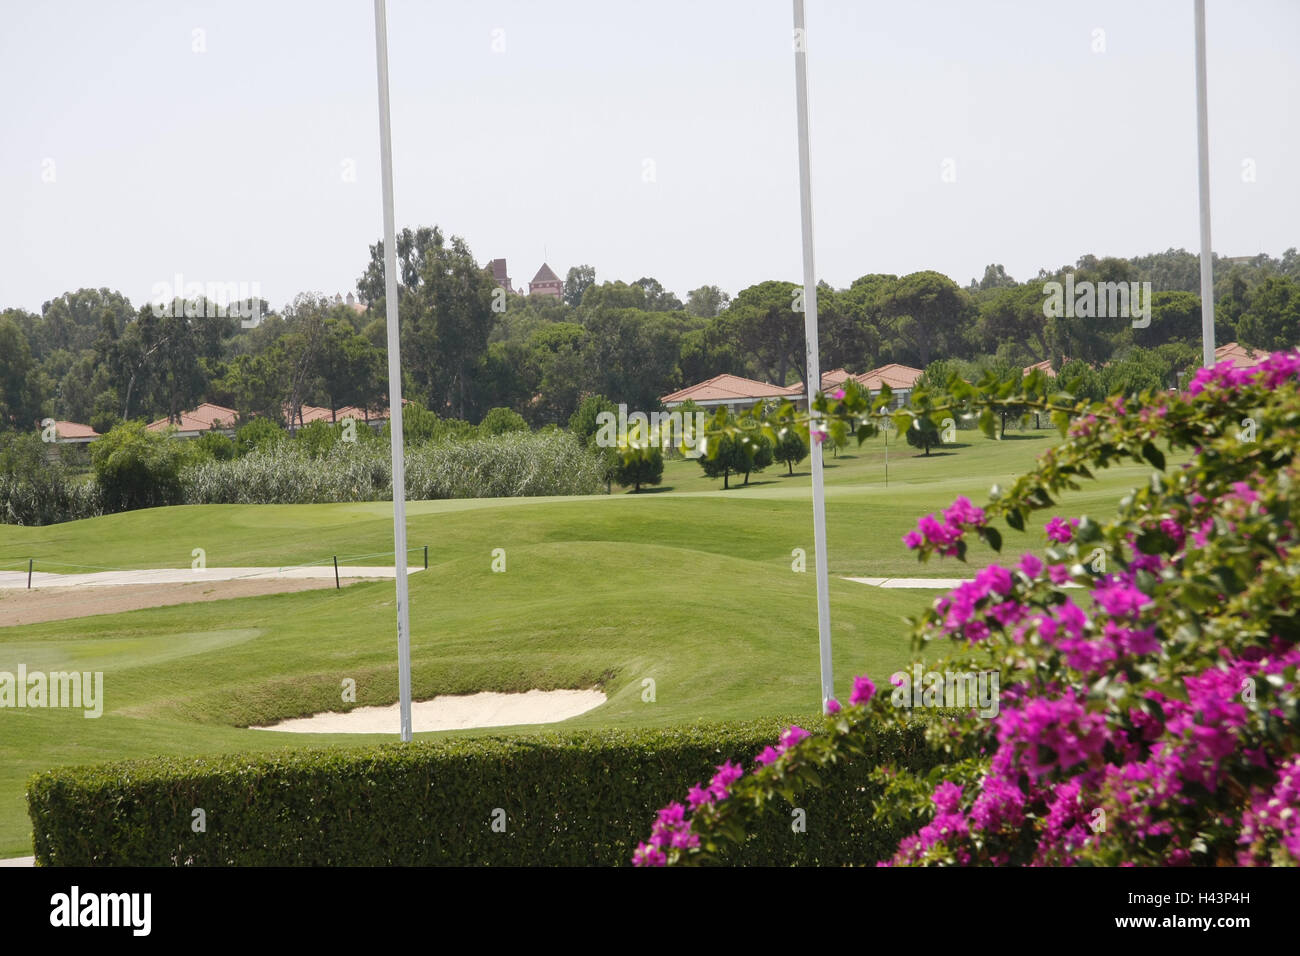 Turkey, Belek, golf course 'sultan', vacation, tourism, leisure time, sport, Golf sport, plant, Golf plant, turf, obstacle, bunker, bougainvillaea, pink ones, Stock Photo